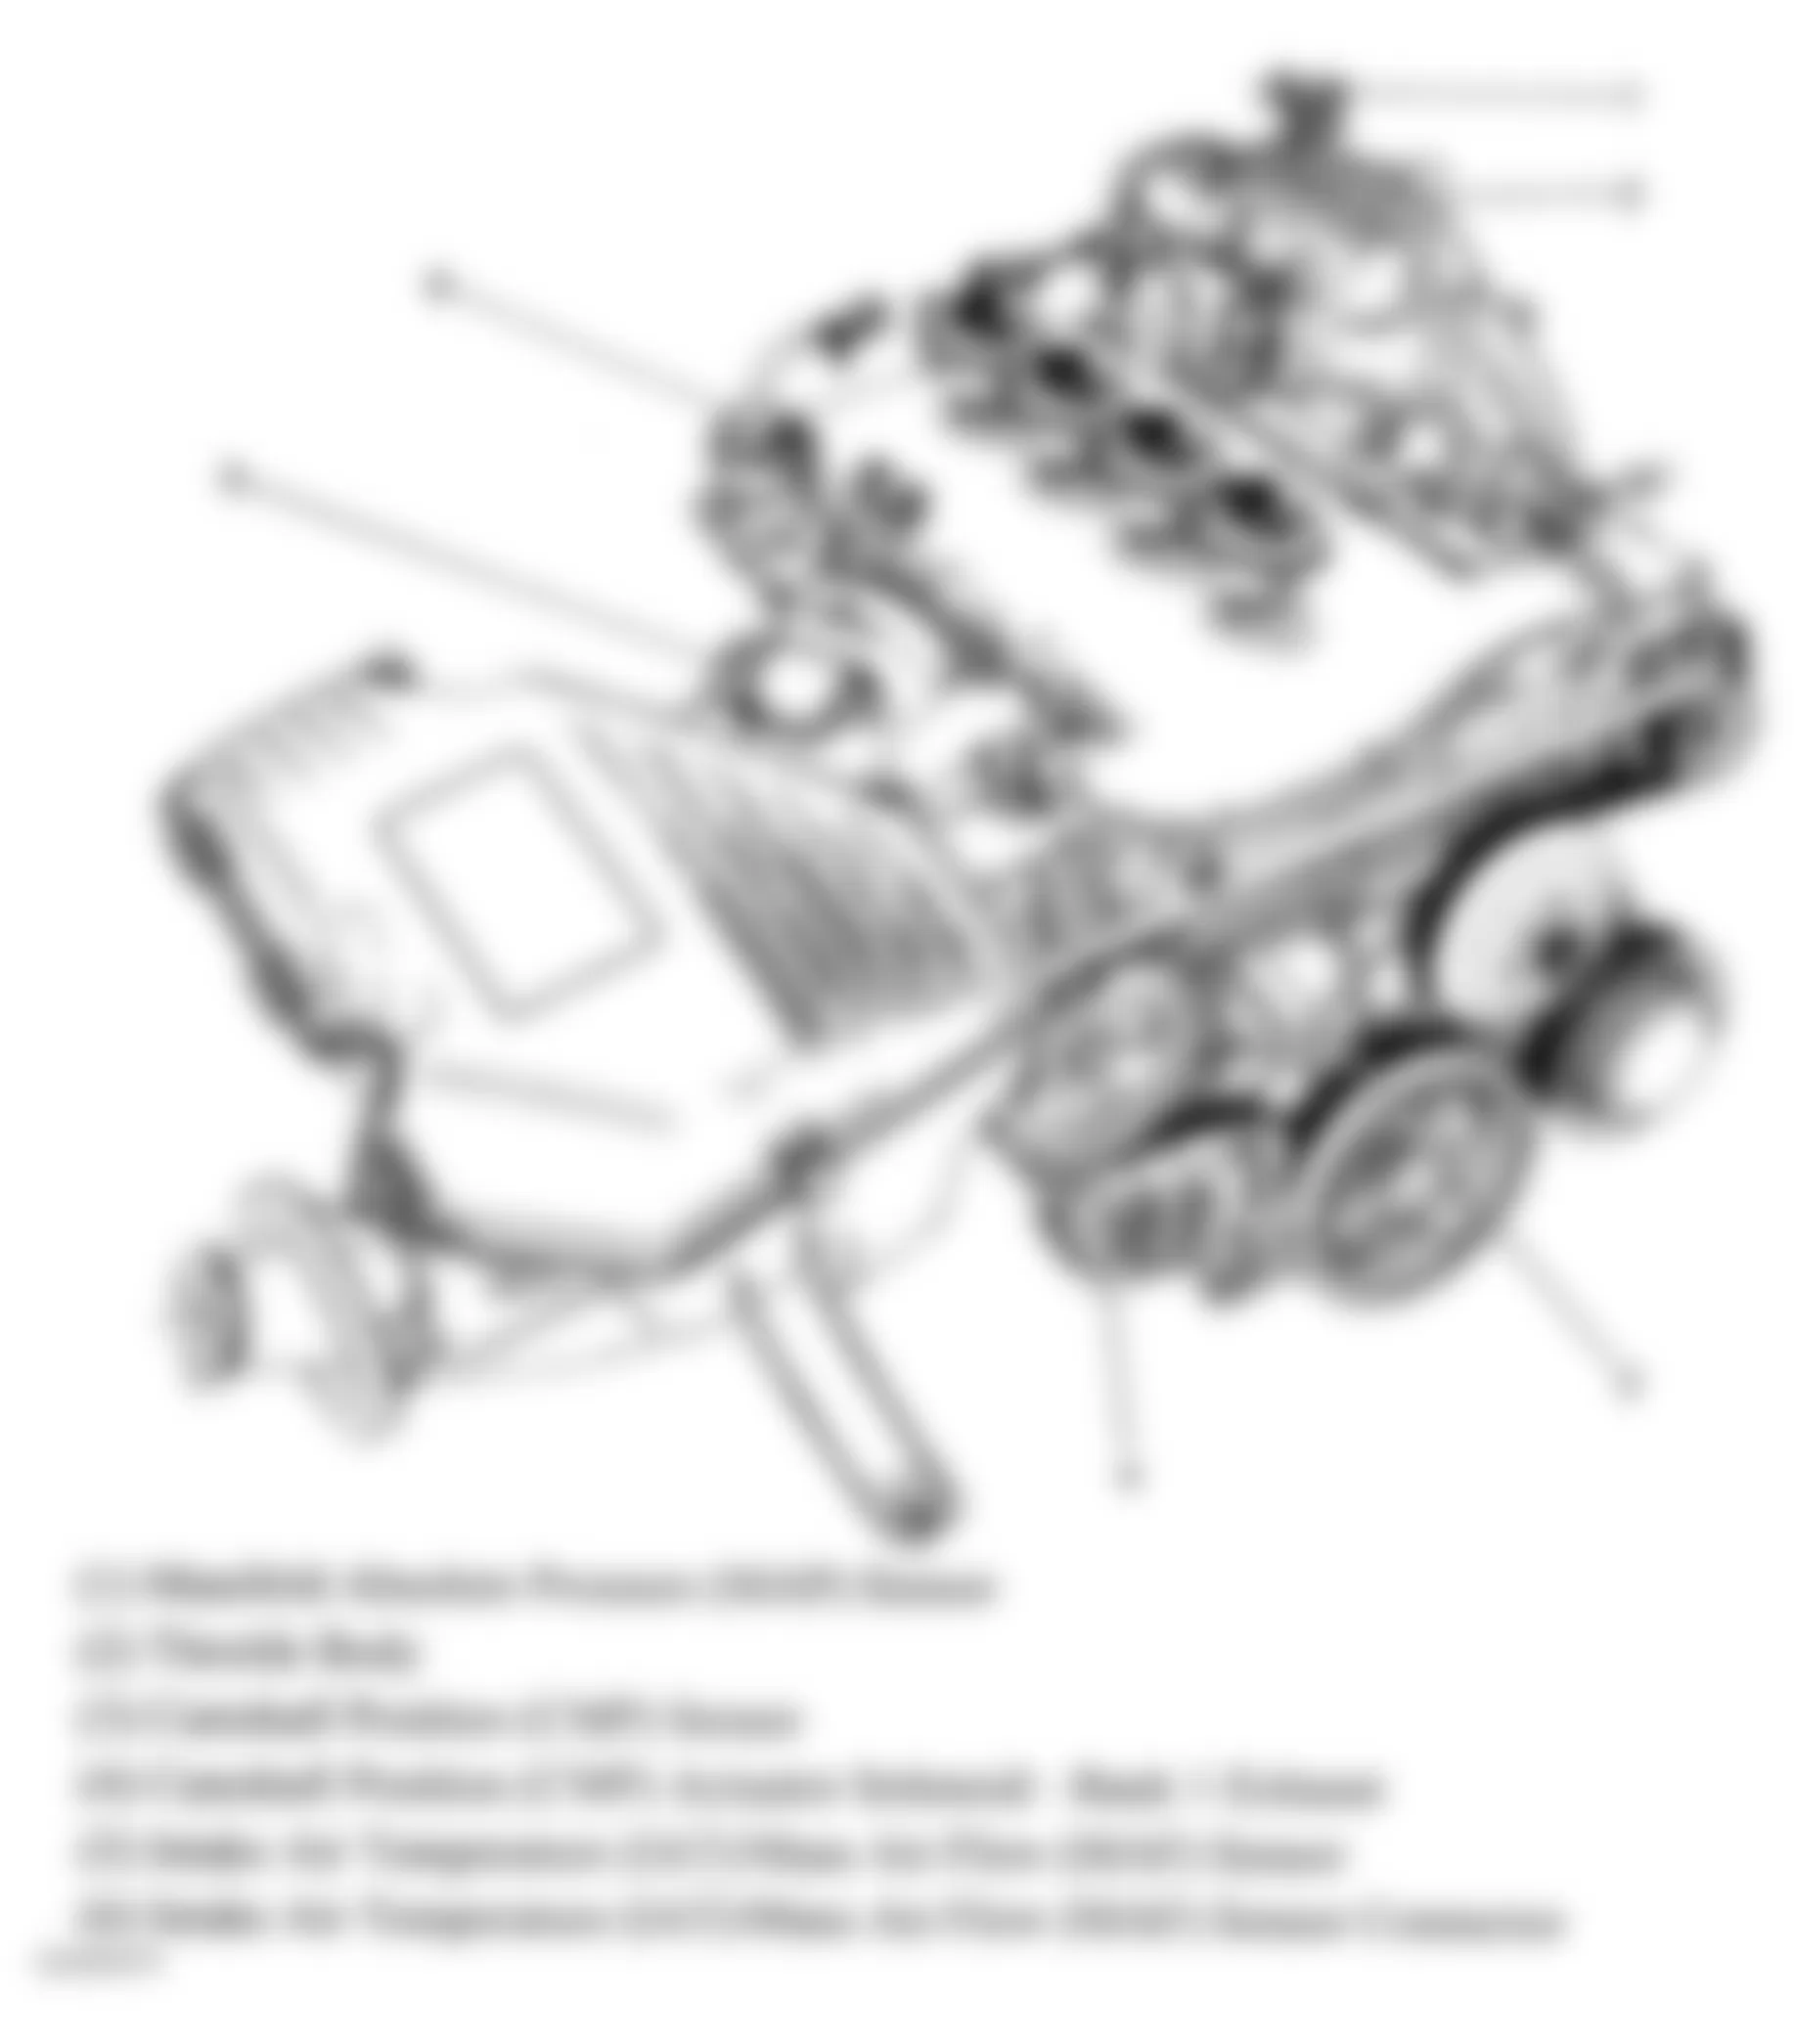 Chevrolet Colorado 2008 - Component Locations -  Top/Front View Of Engine (2.9L)